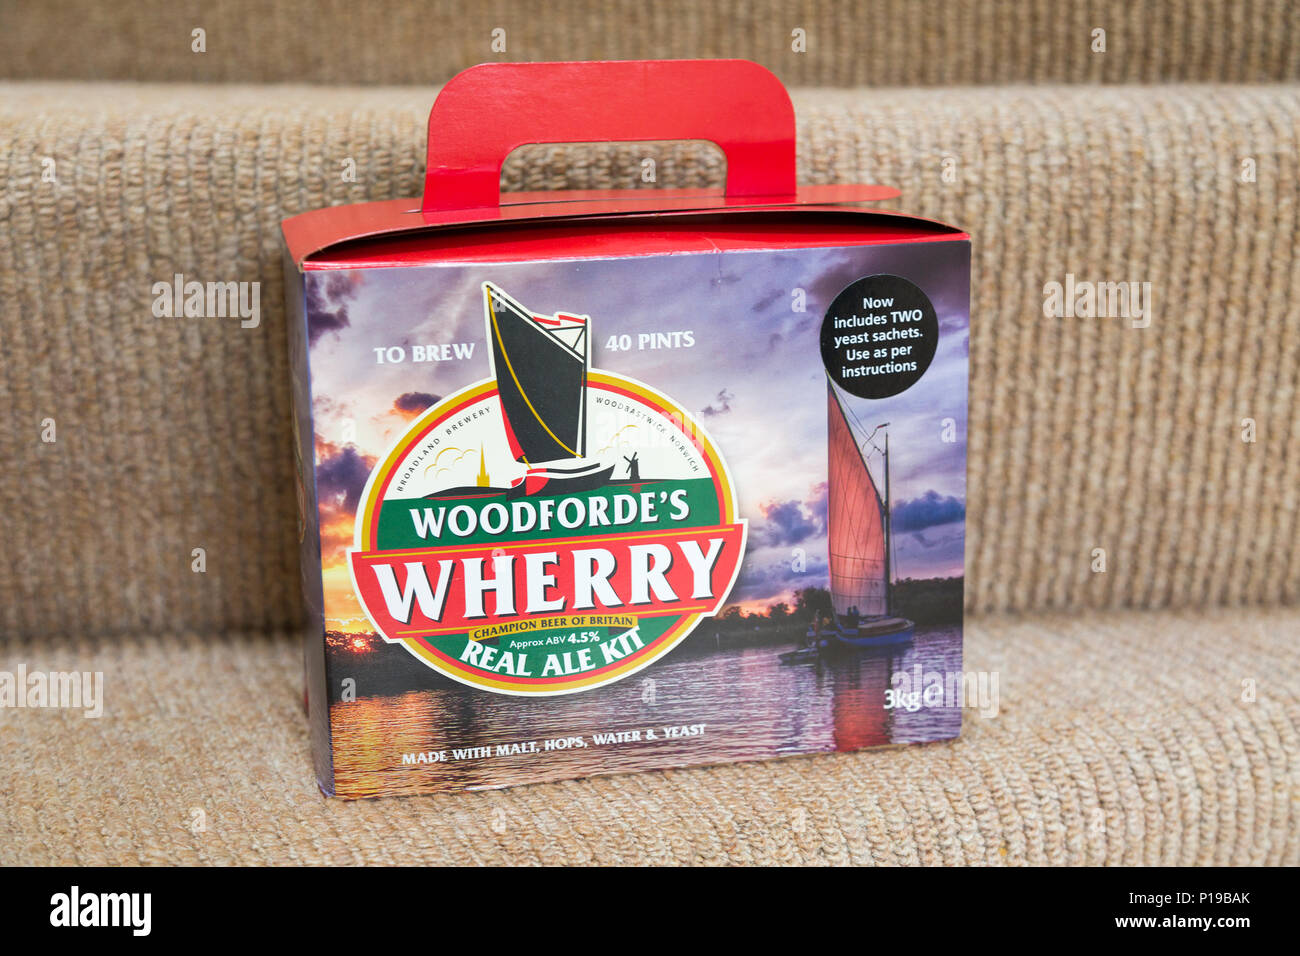 Woodforde's Wherry real ale bière kit home brewing fort paquet, UK Banque D'Images